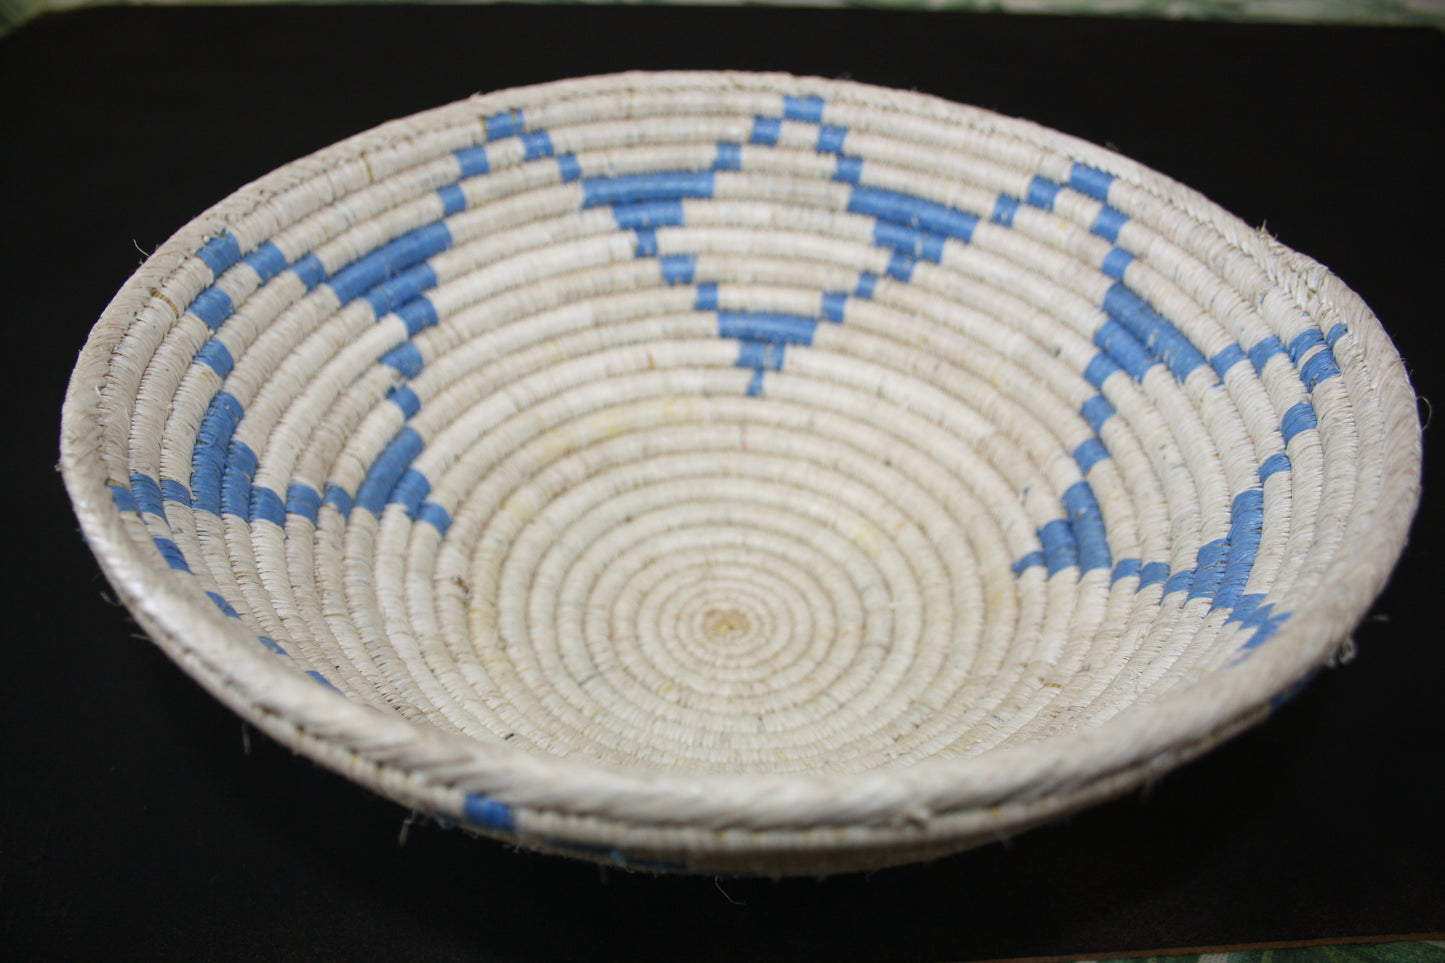 Recycled Plastic Weaved Baskets